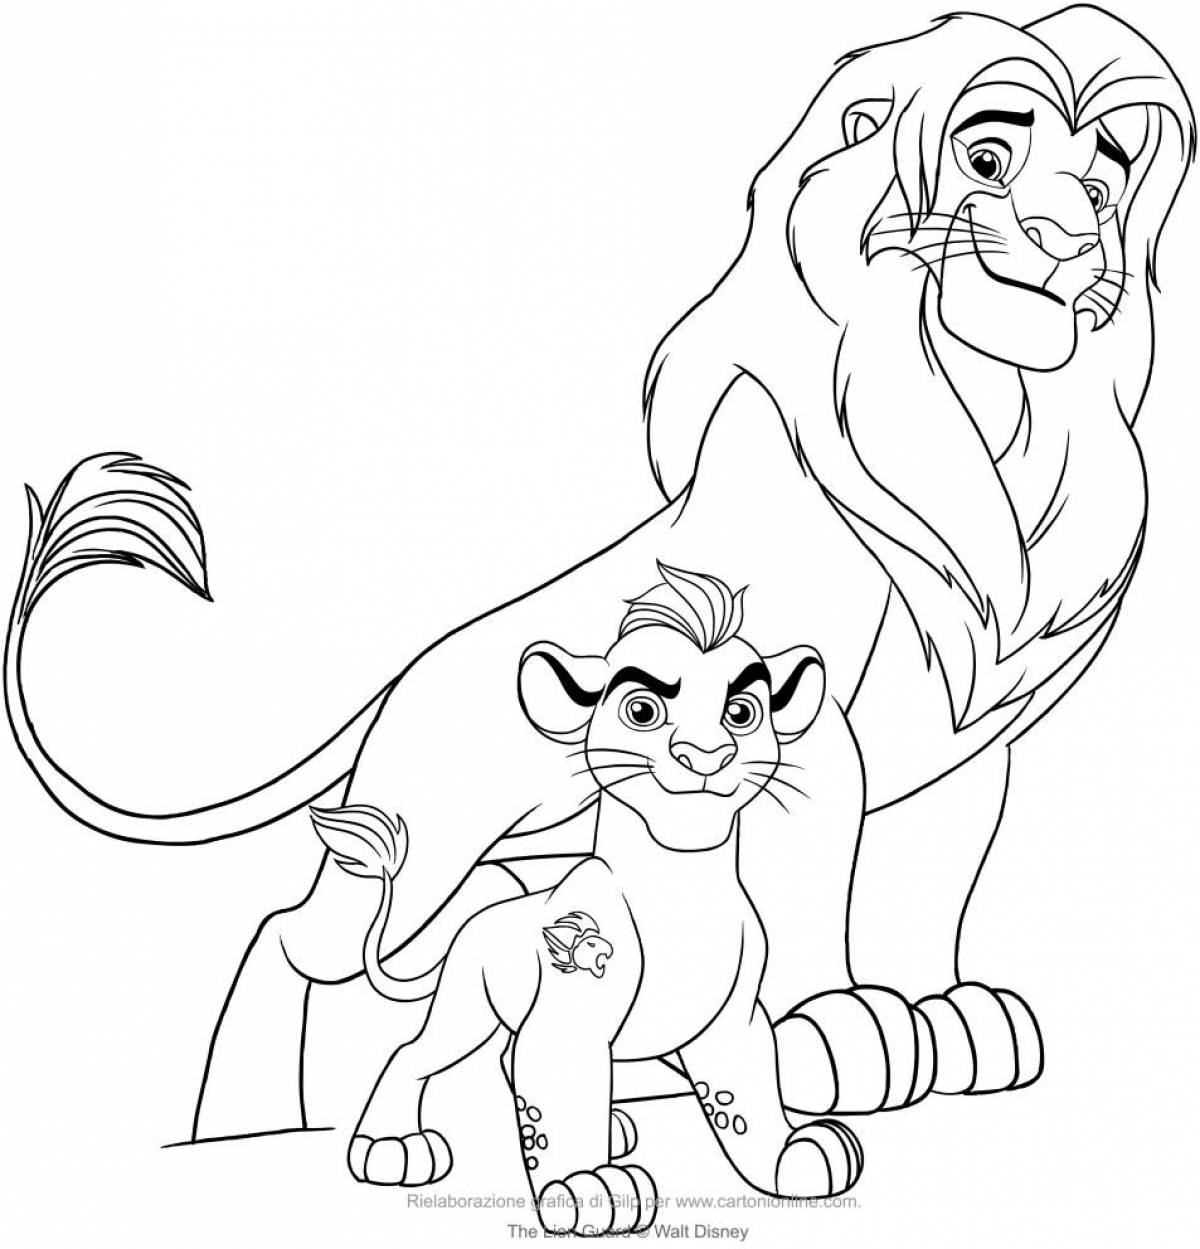 Simba's fancy coloring book